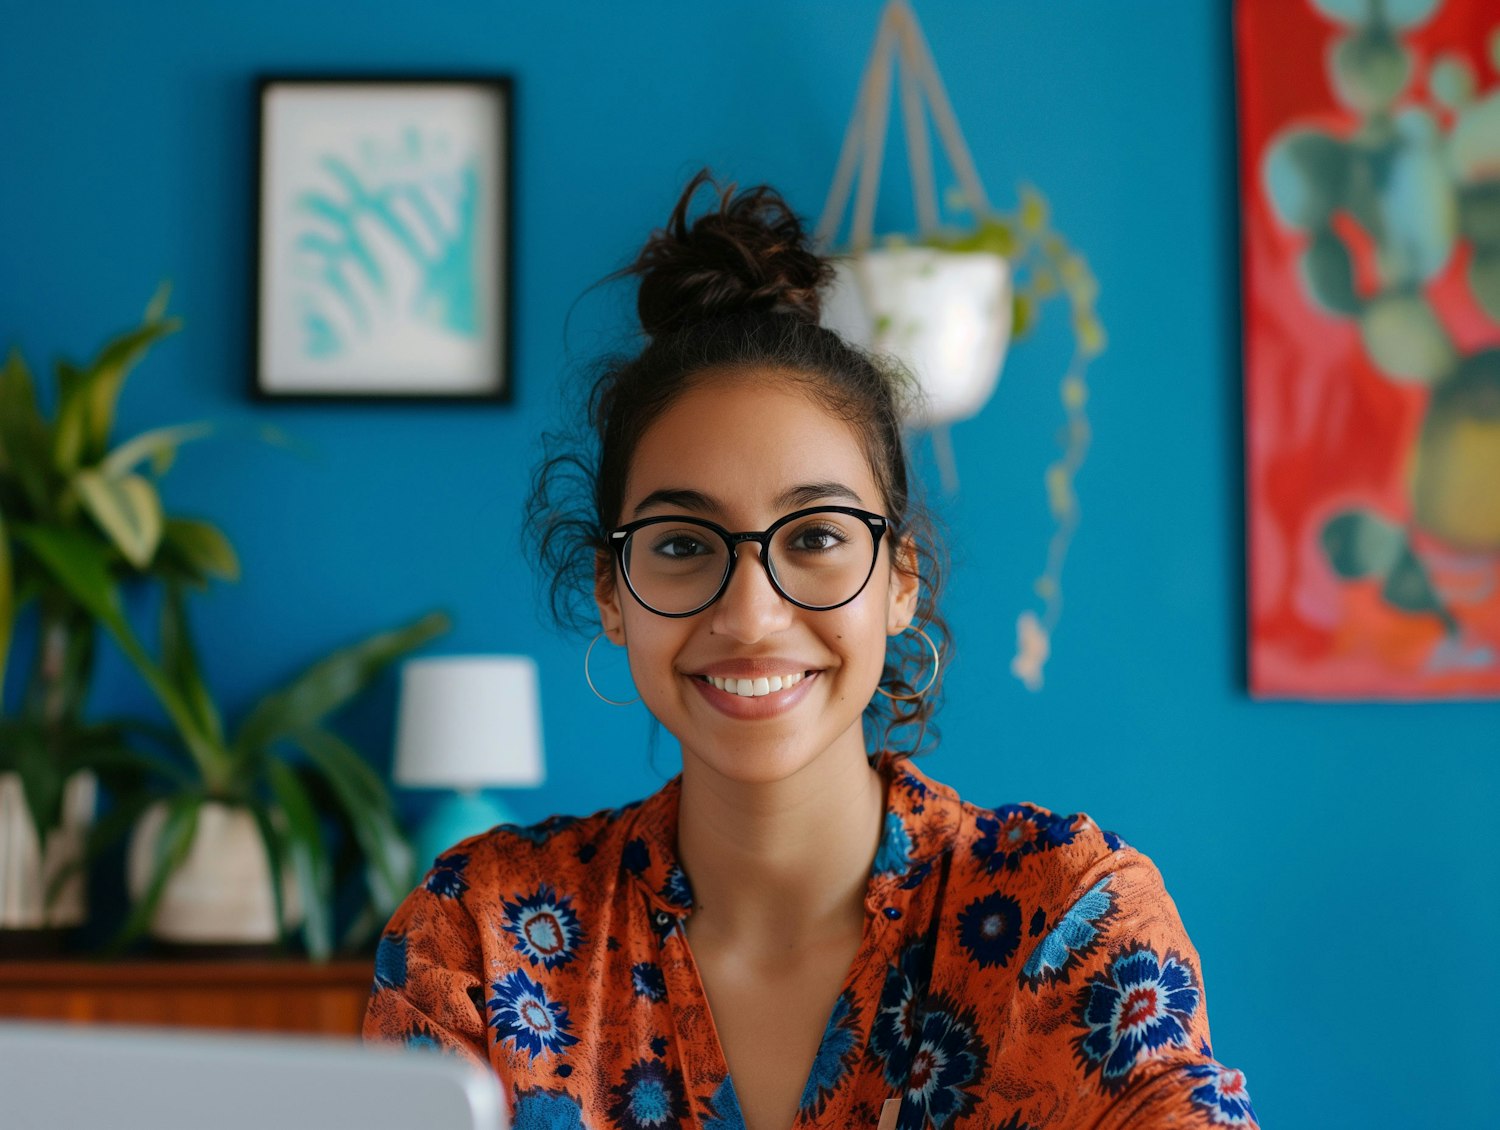 Smiling Woman with Glasses and Patterned Blouse